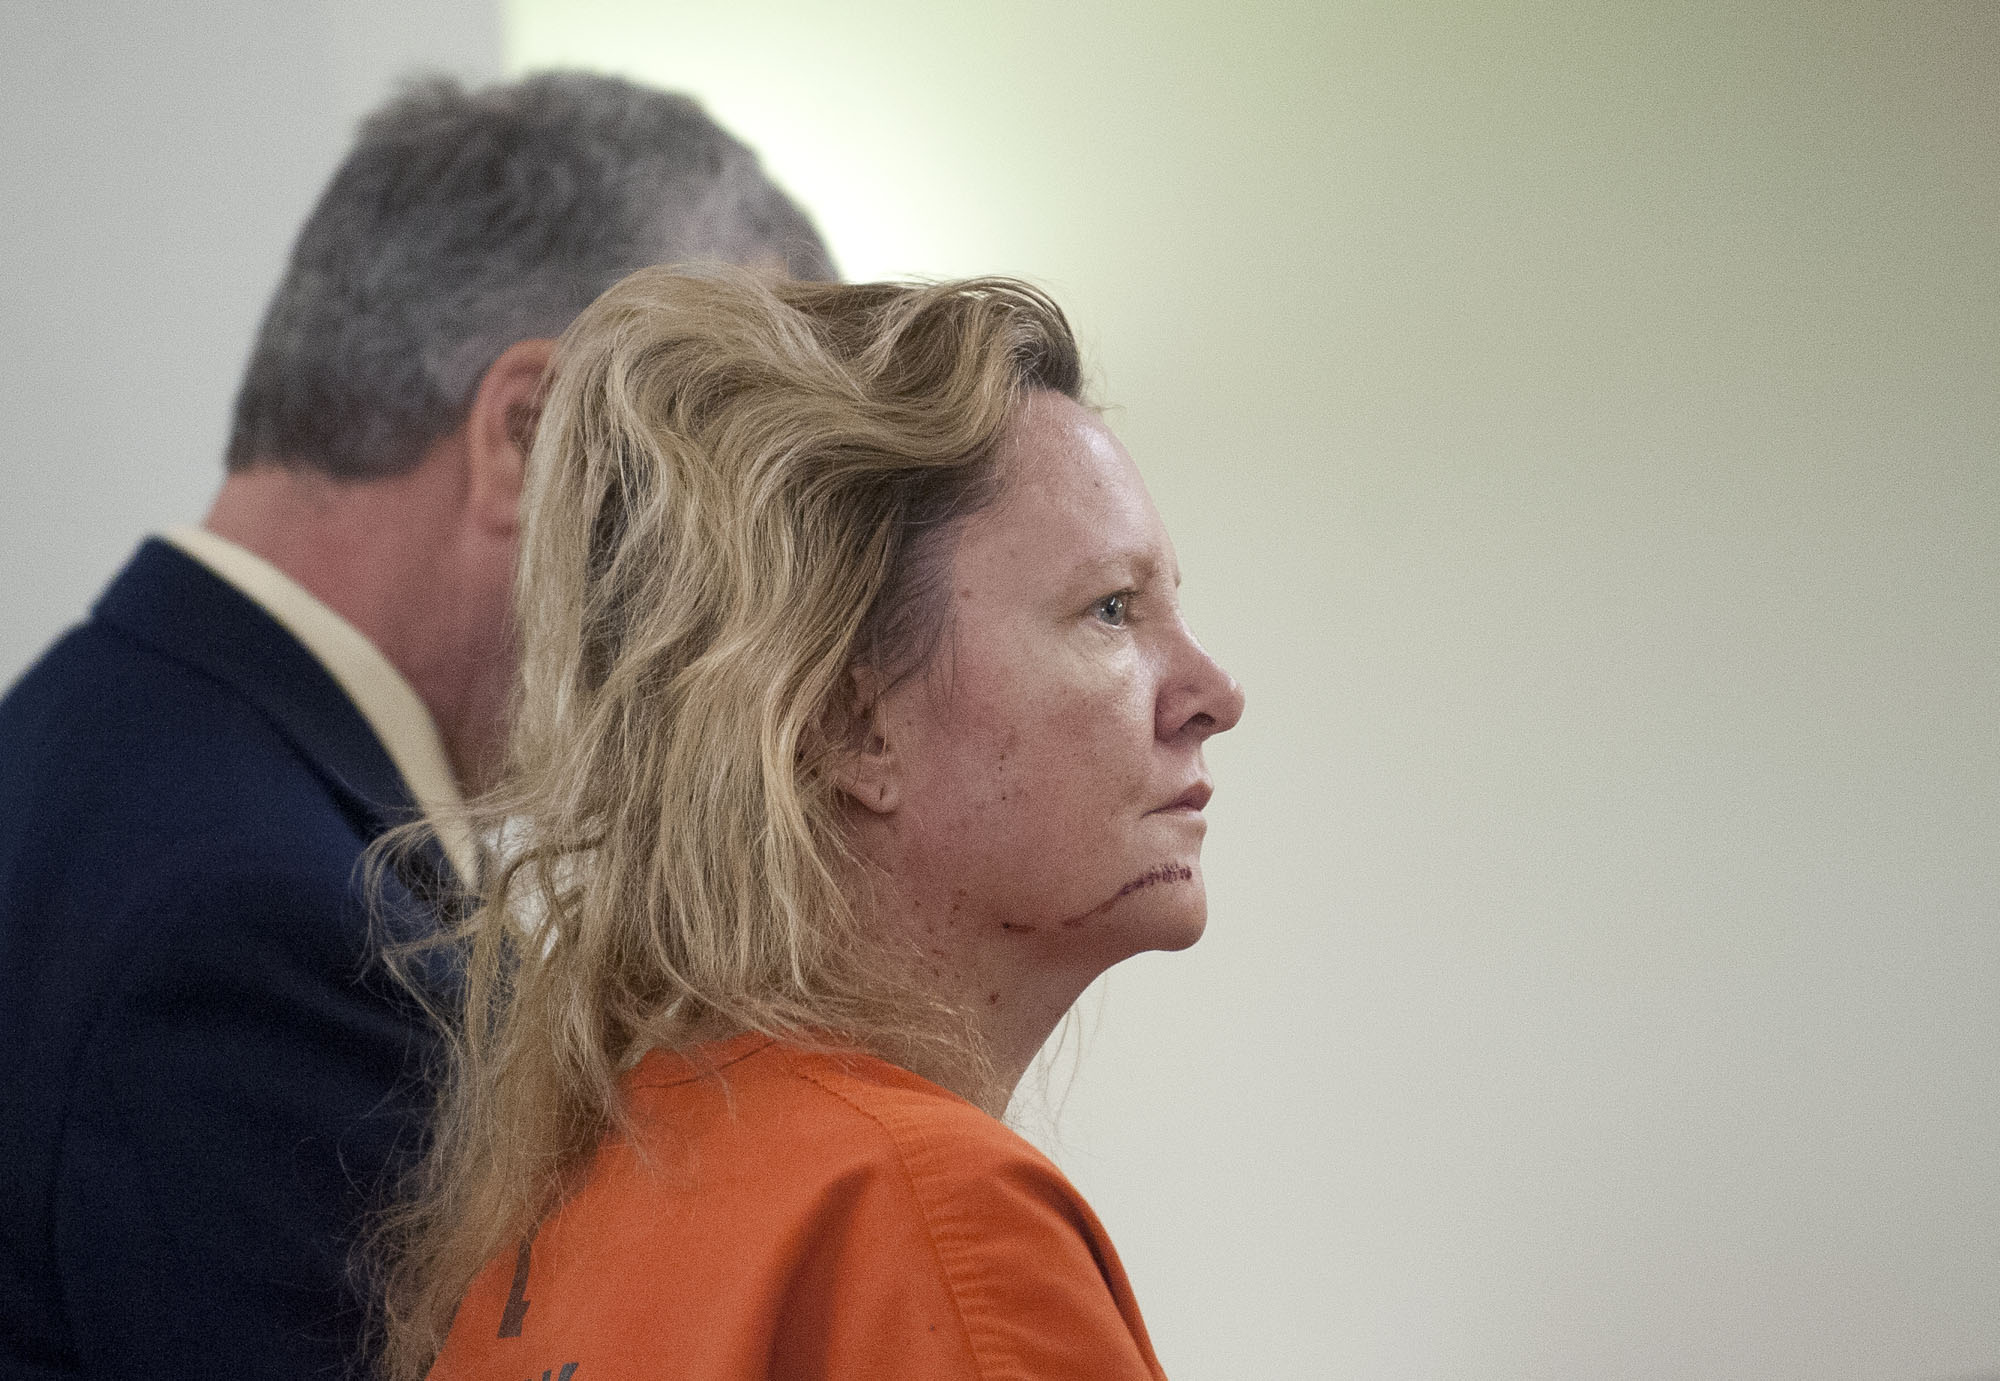 Deborah A. Lennon, 46, will be sent to Western State Hospital Friday for an evaluation to determine whether she's mentally fit to assist in her defense against charges of attempted murder and other crimes related a shooting earlier this year. She appear in court Feb.